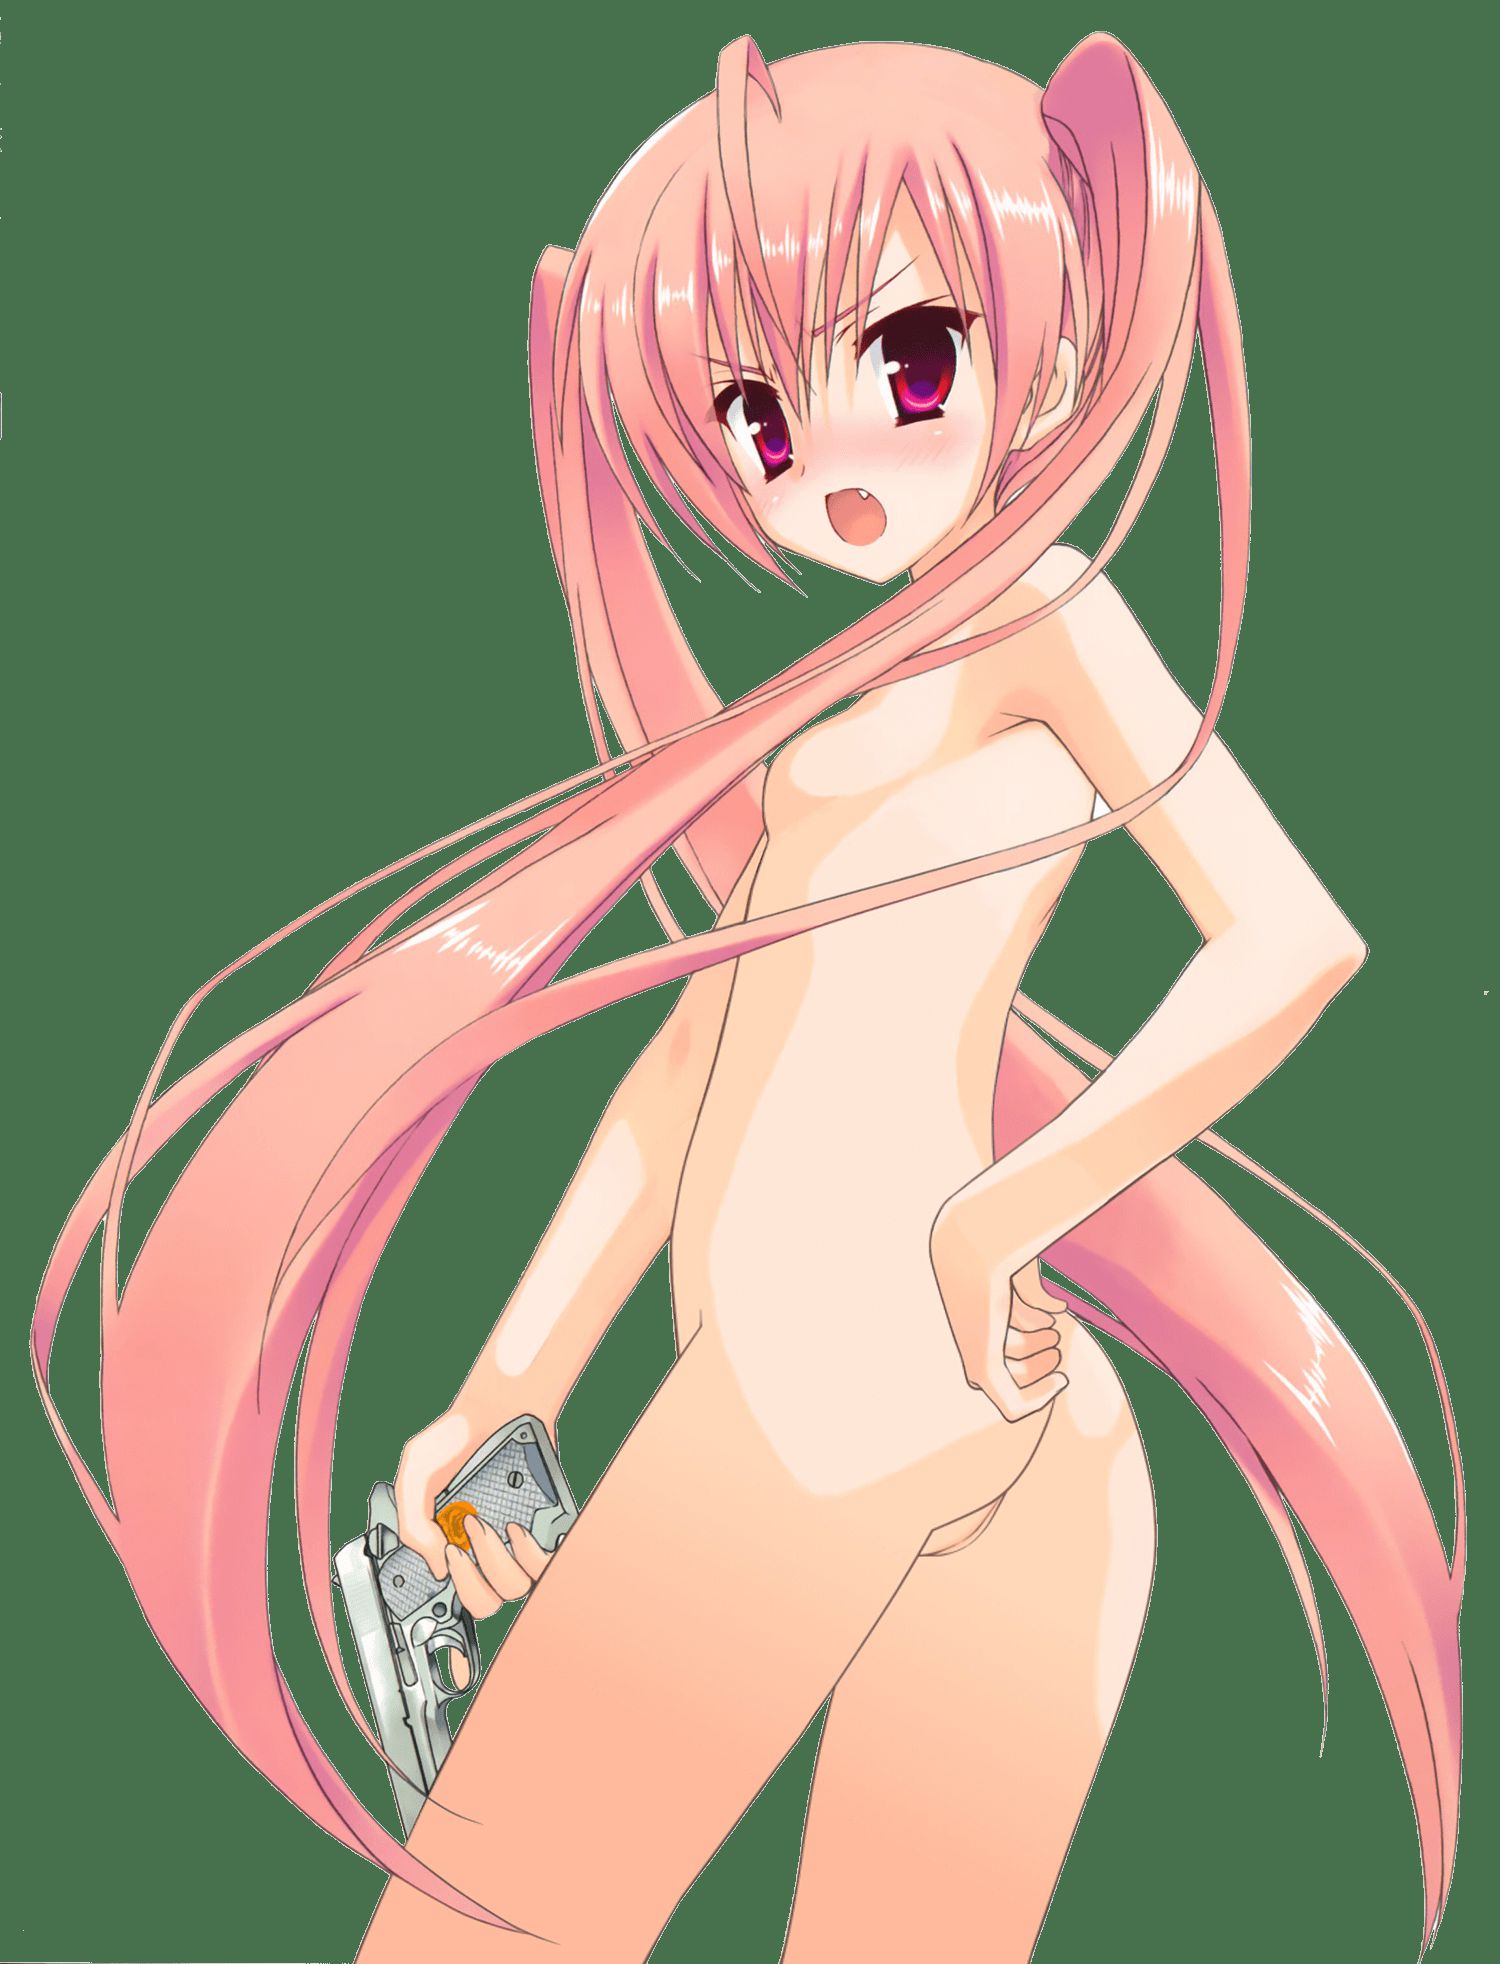 [Anime character material] png background erotic images of anime characters 86 45